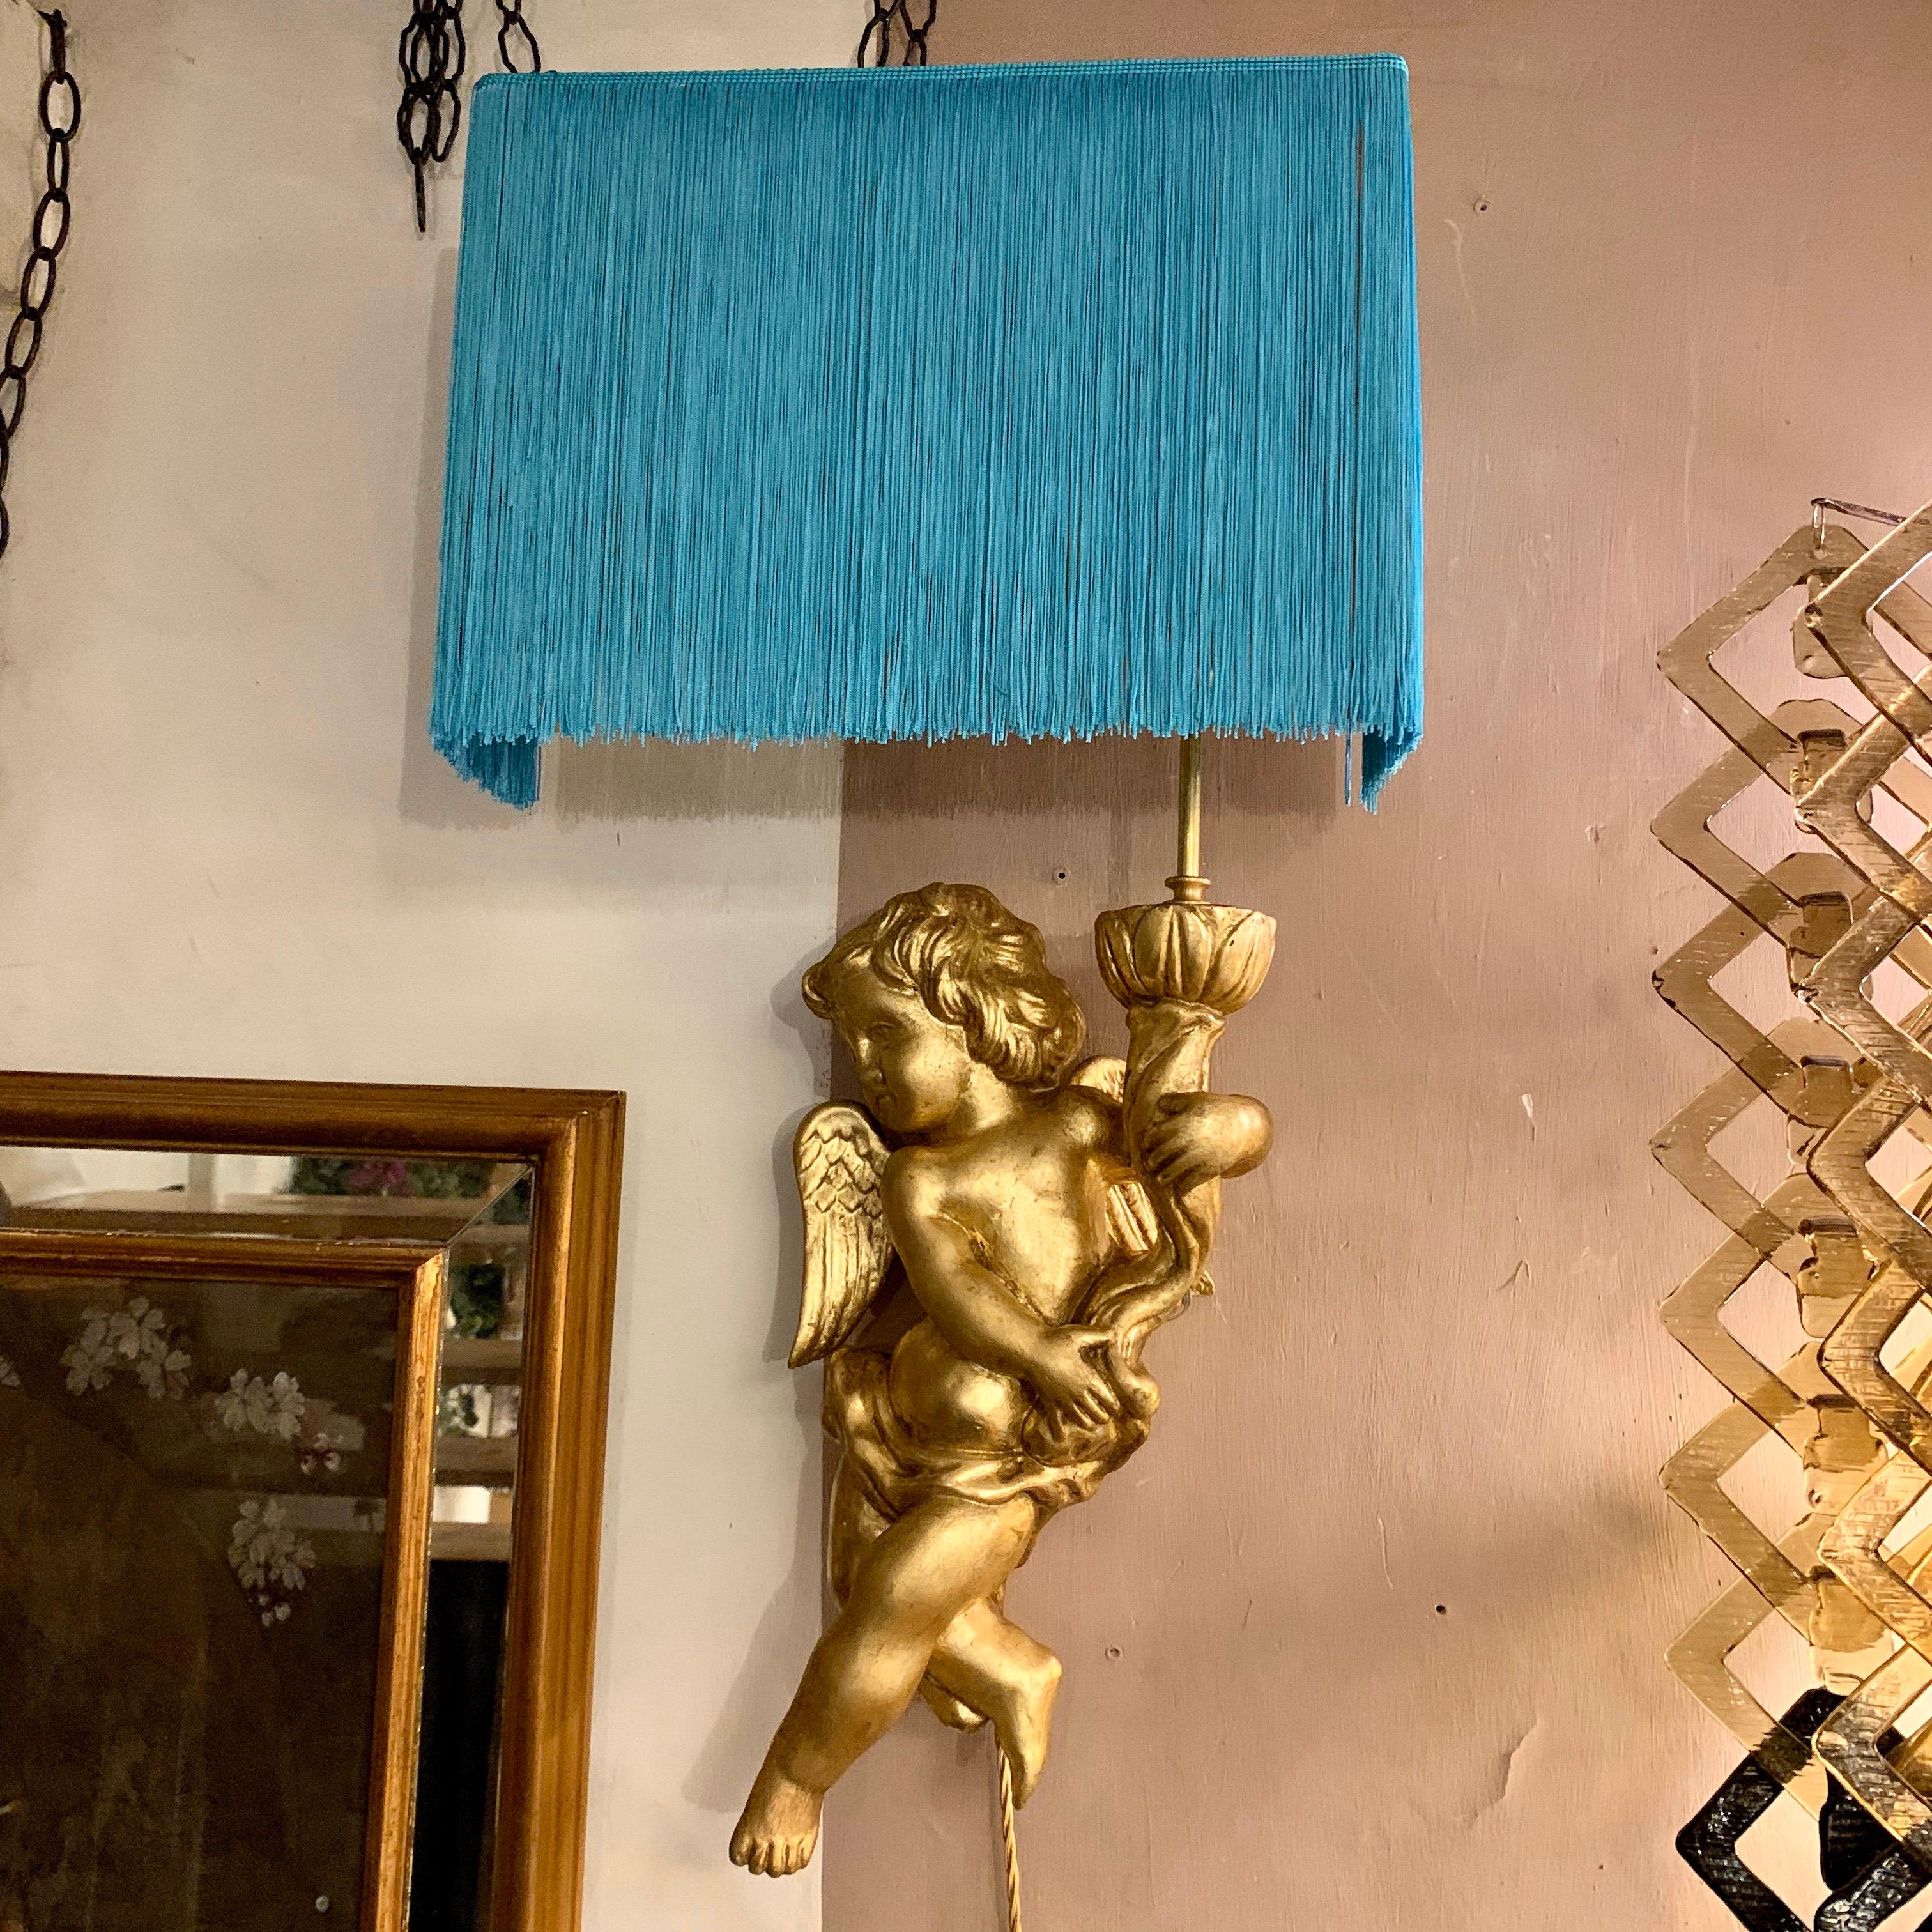 Pair of antique giltwood sculpture angel appliques with turquoise fringed lampshades.
The giltwood sculptures are art Florentin art wood carving, we have realized new handcrafted turquoise lampshades with fringes.
High decorative specular wall